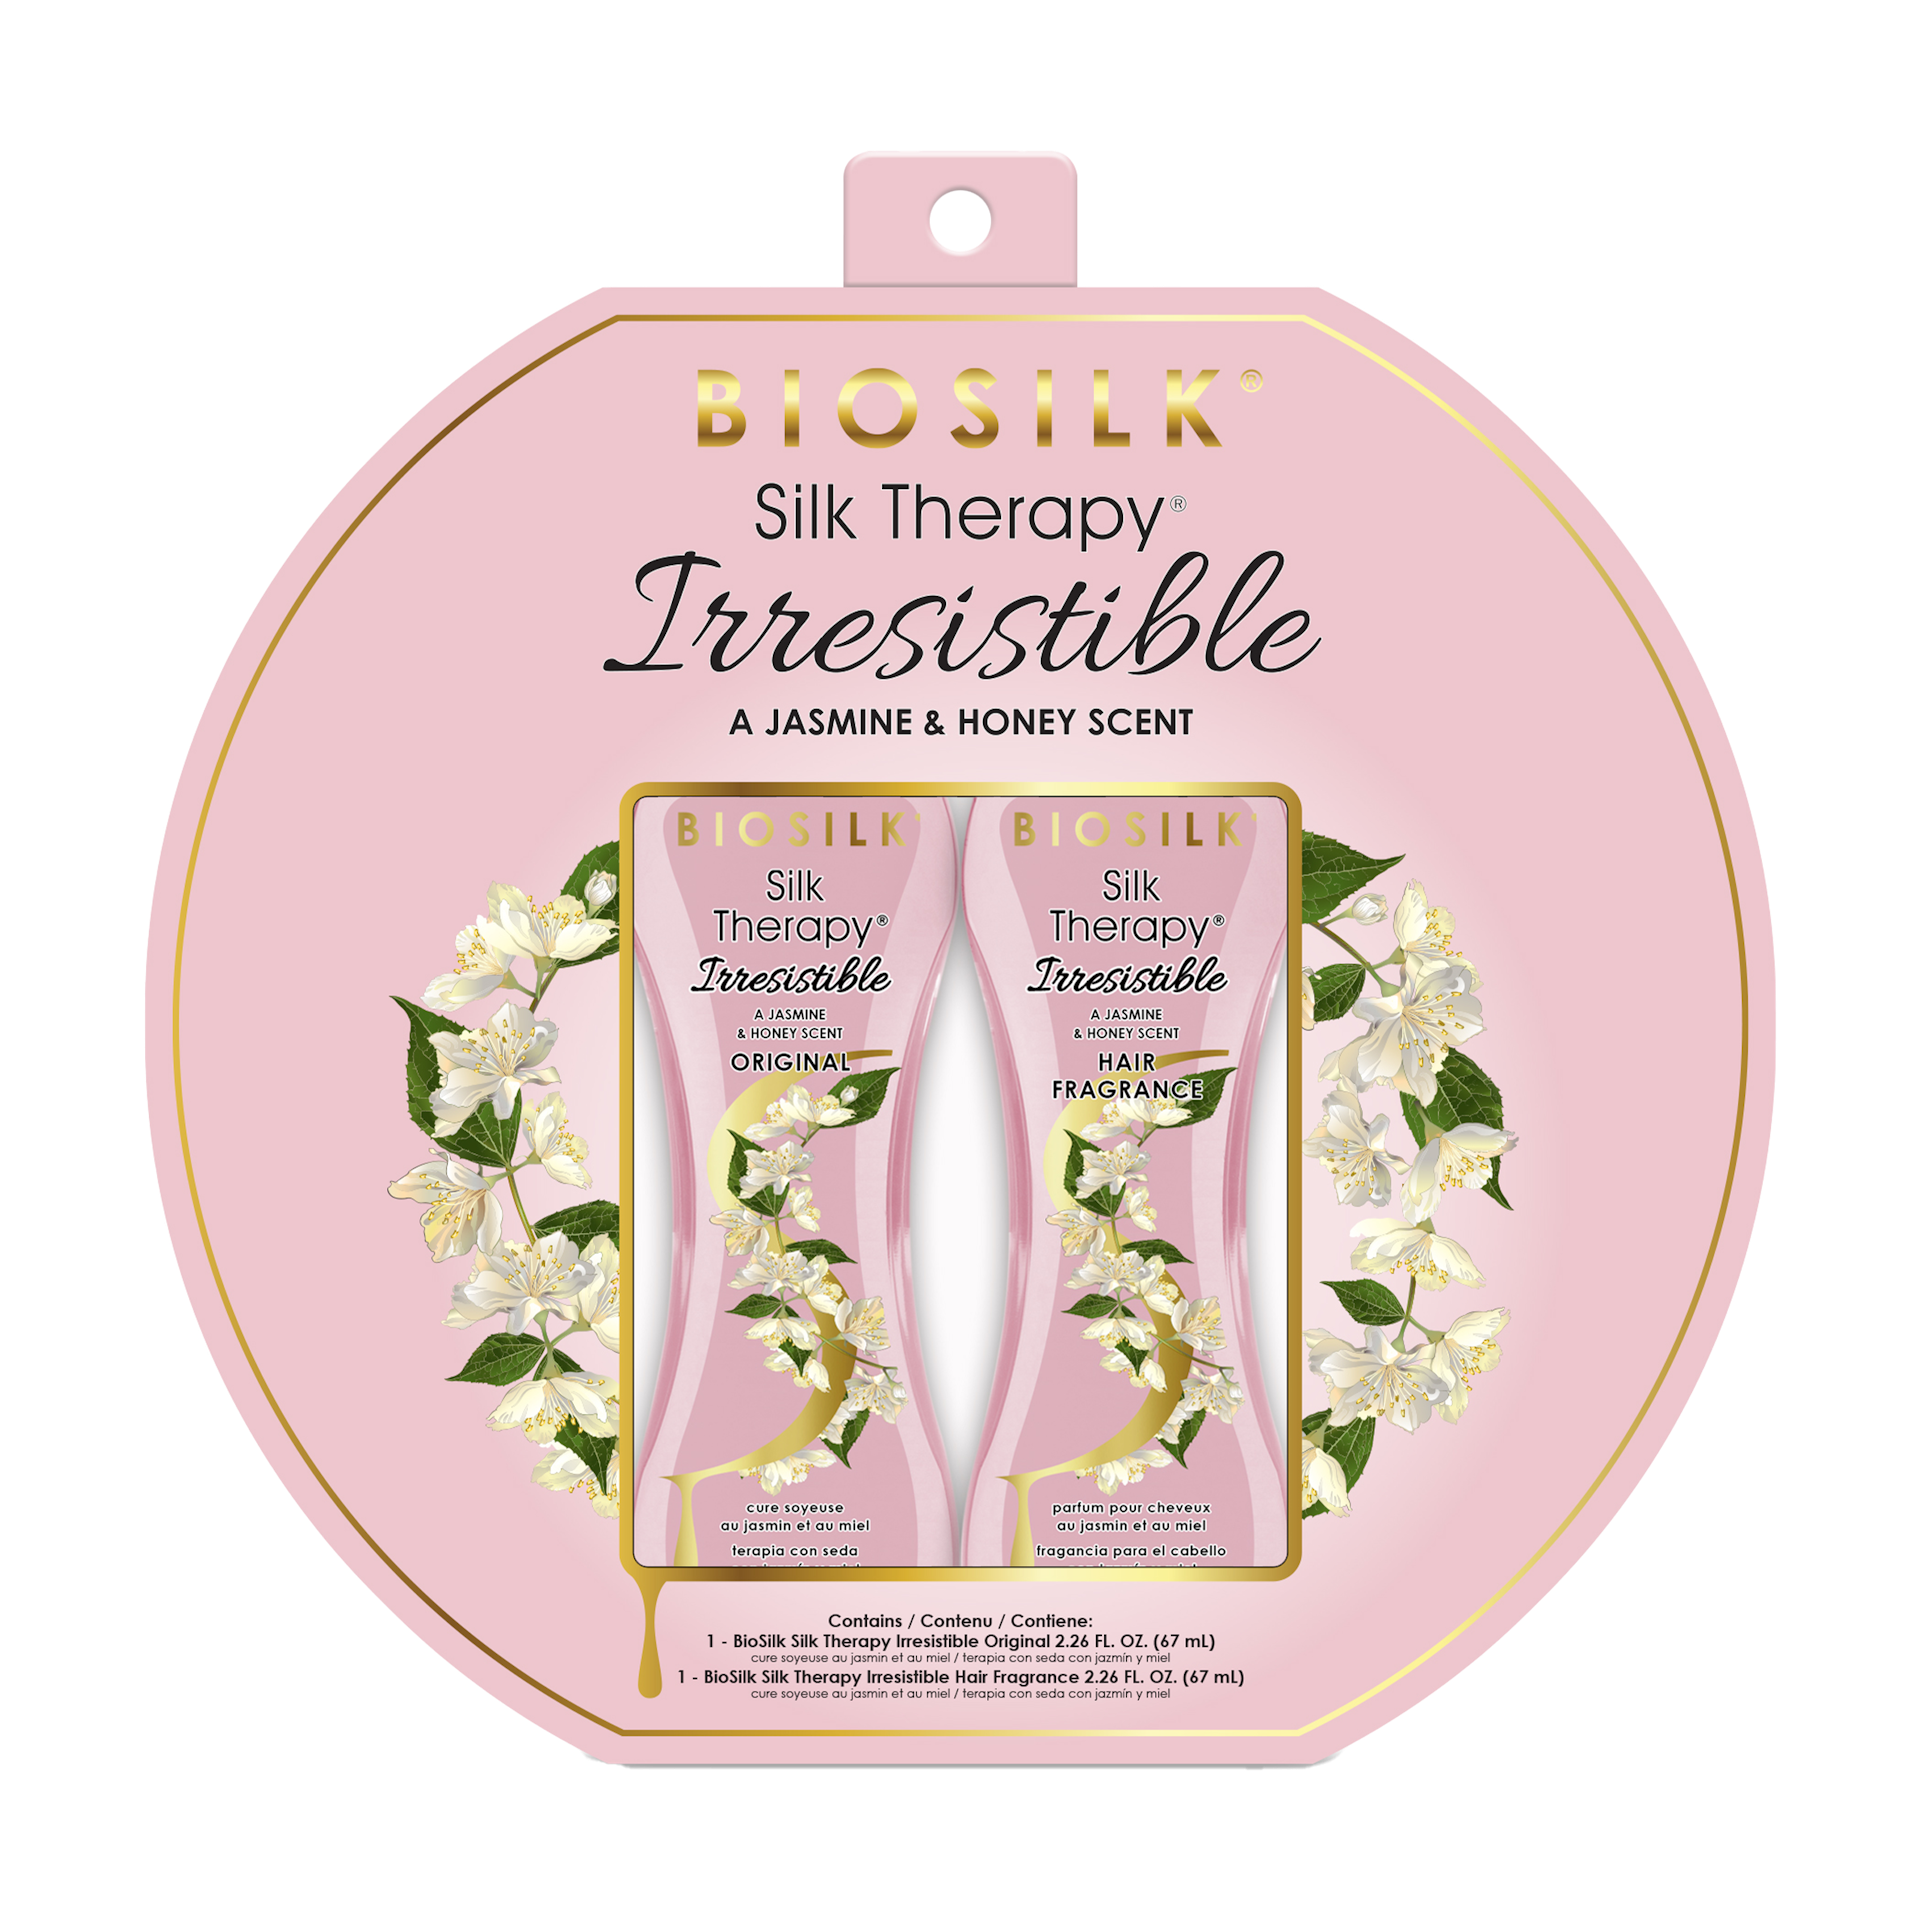 BioSilk Silk Therapy Irresistible Duo Ornament Kit front side image